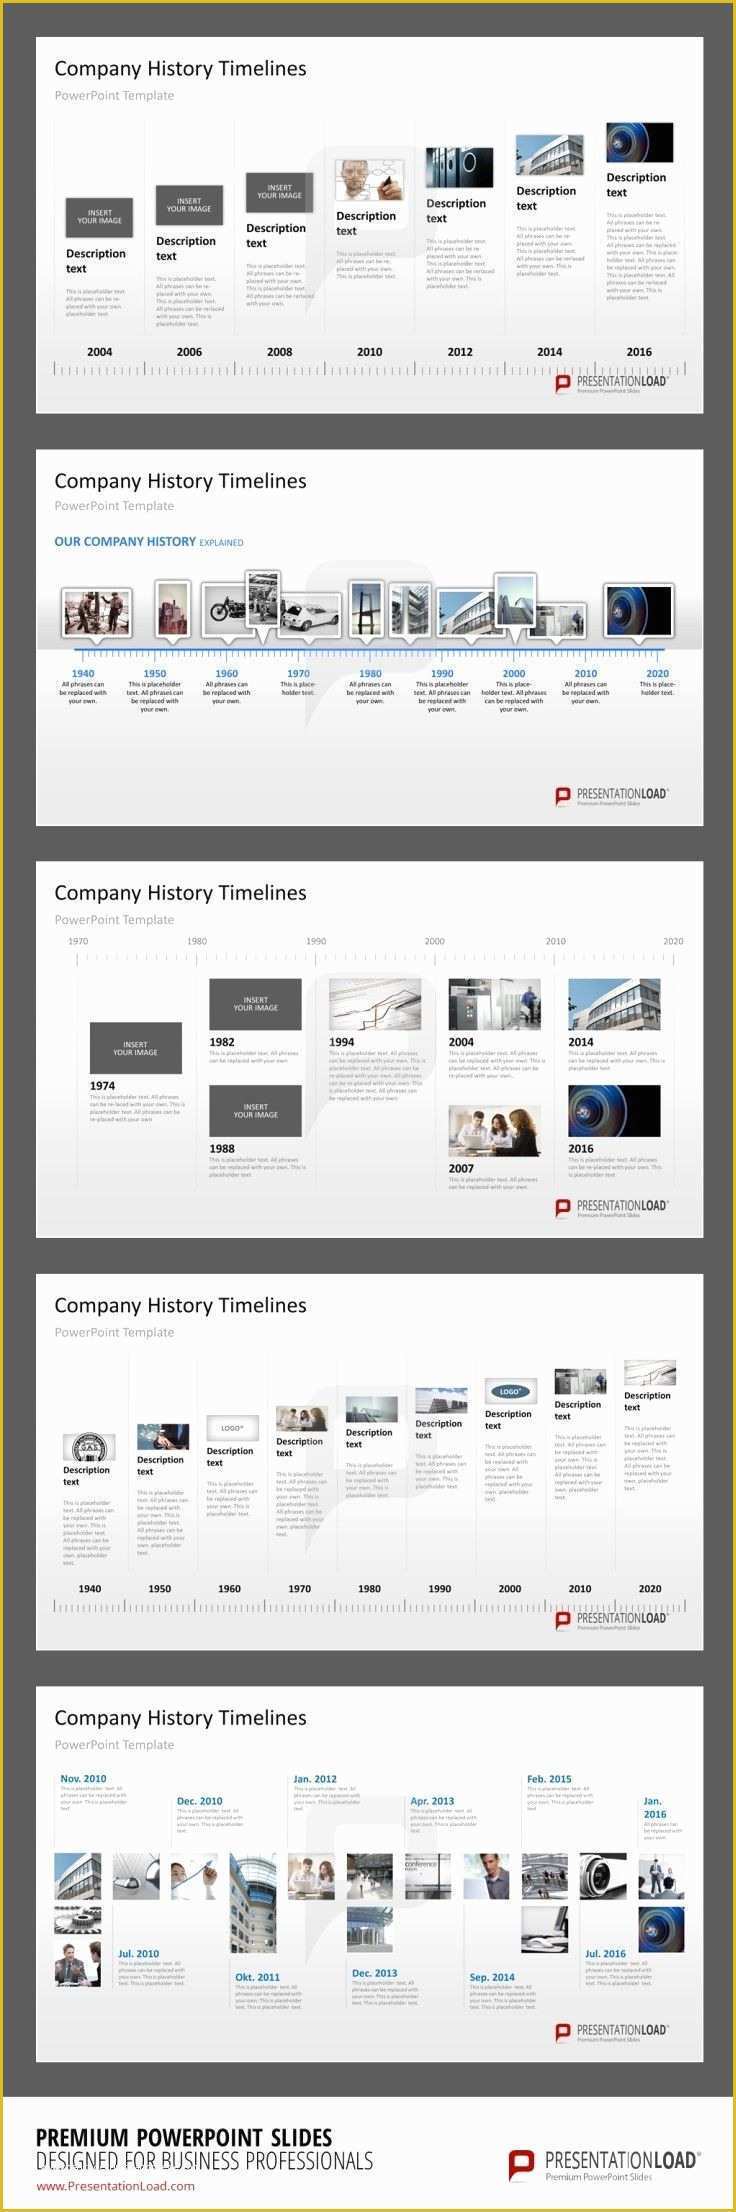 Powerpoint History Timeline Template Free Of Pany History Milestones In A Timeline Powerpoint